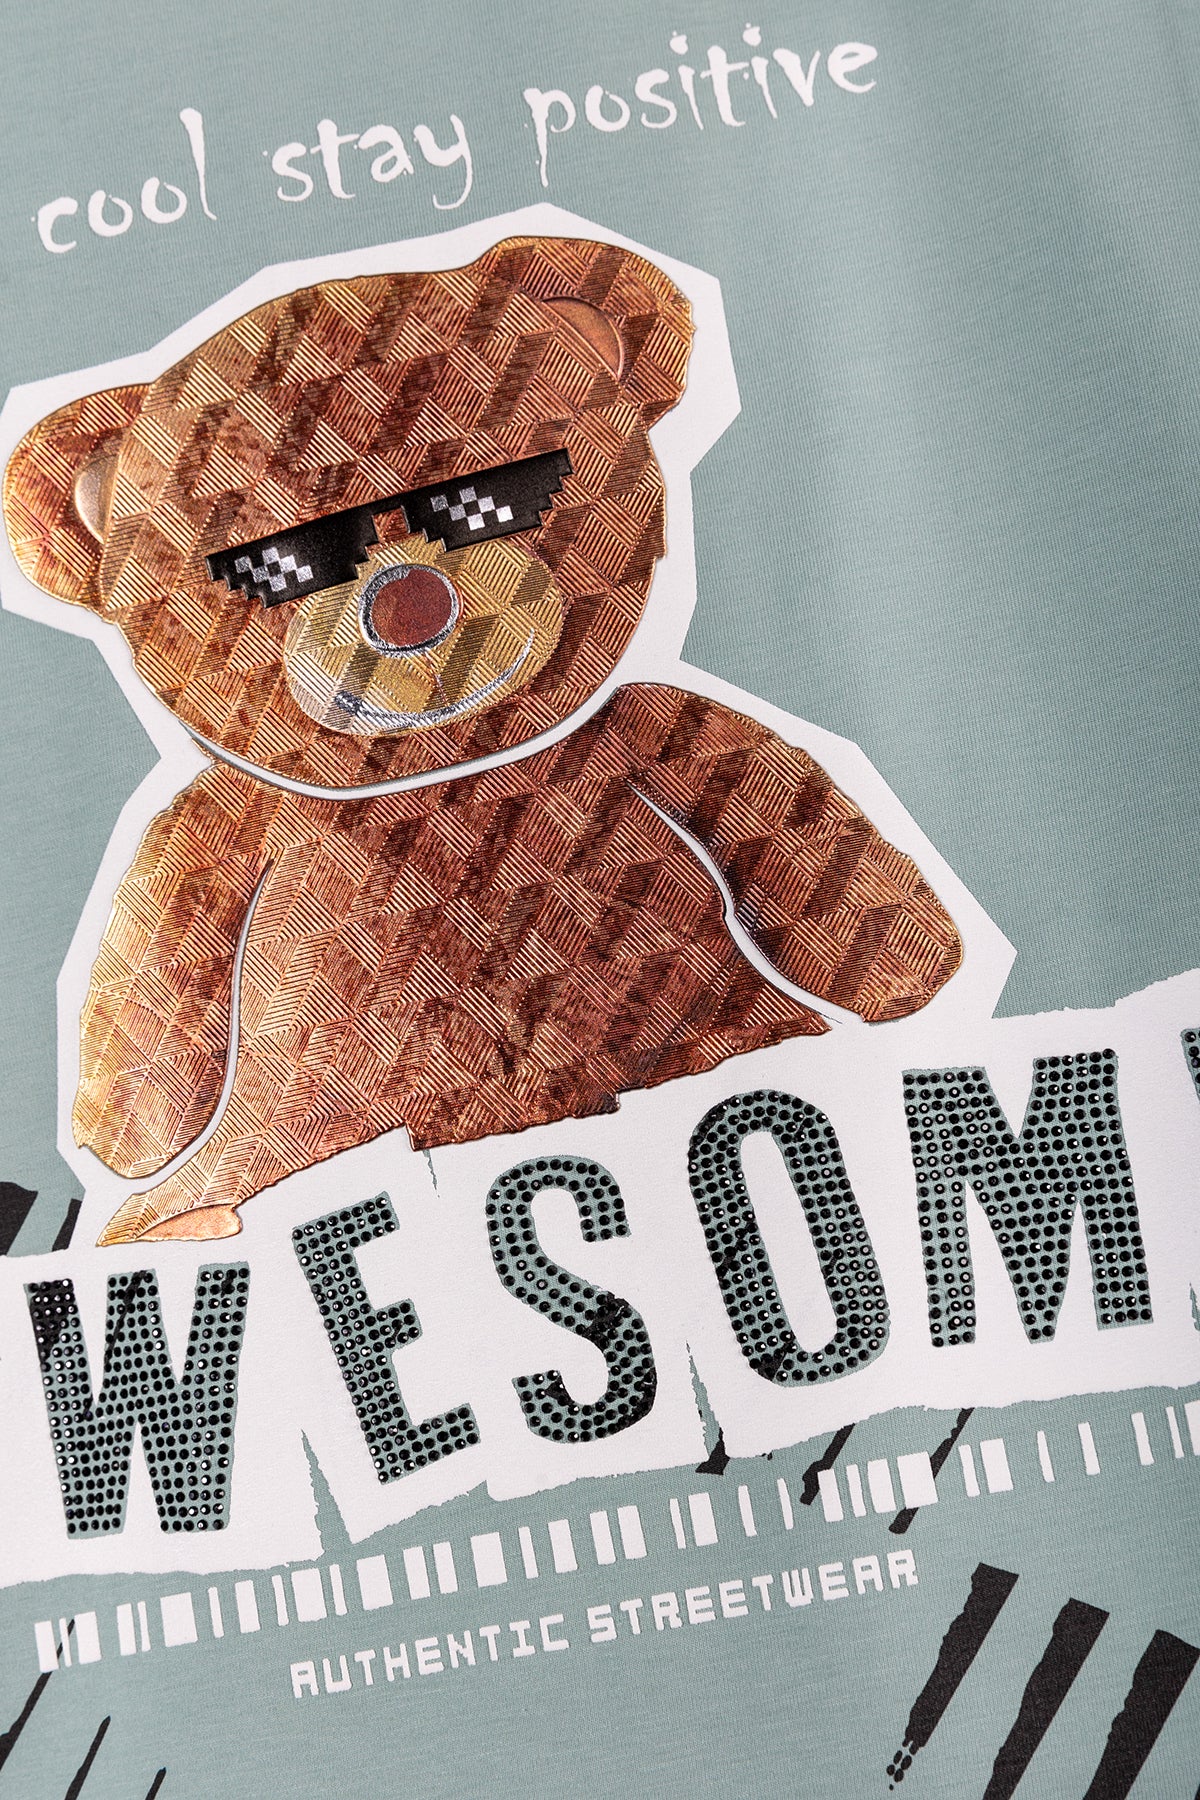 "Awesome" Teddy Bear Graphic Tee